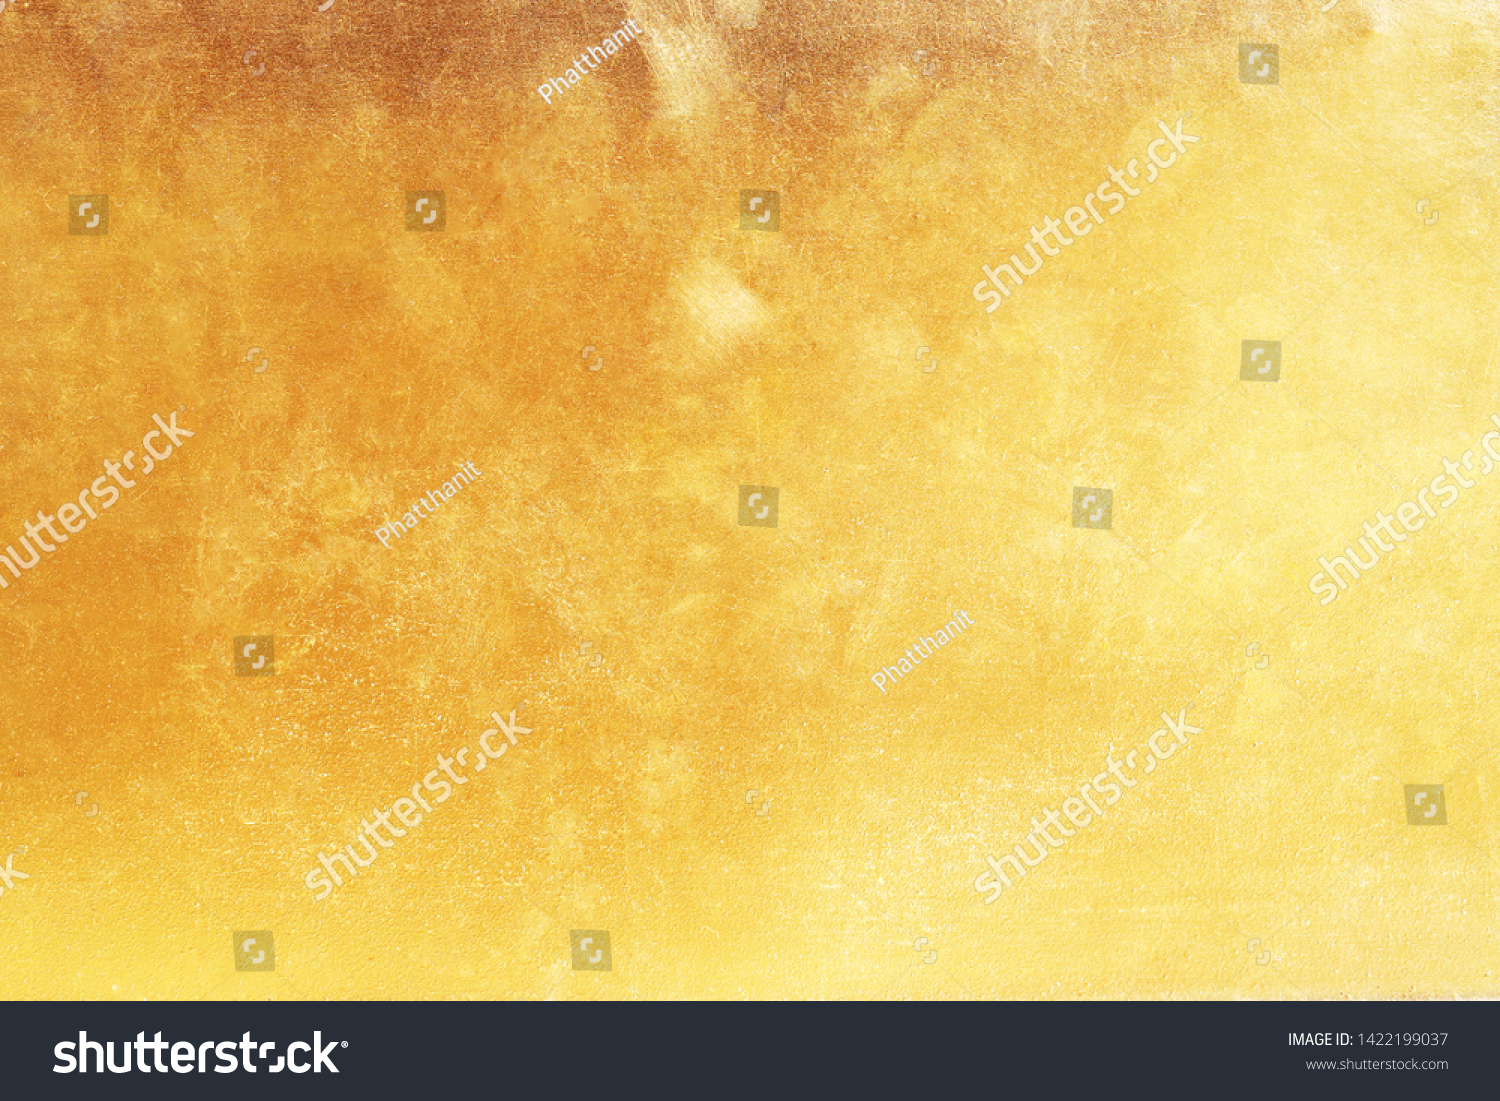 Gold abstract background or texture and gradients shadow. #1422199037